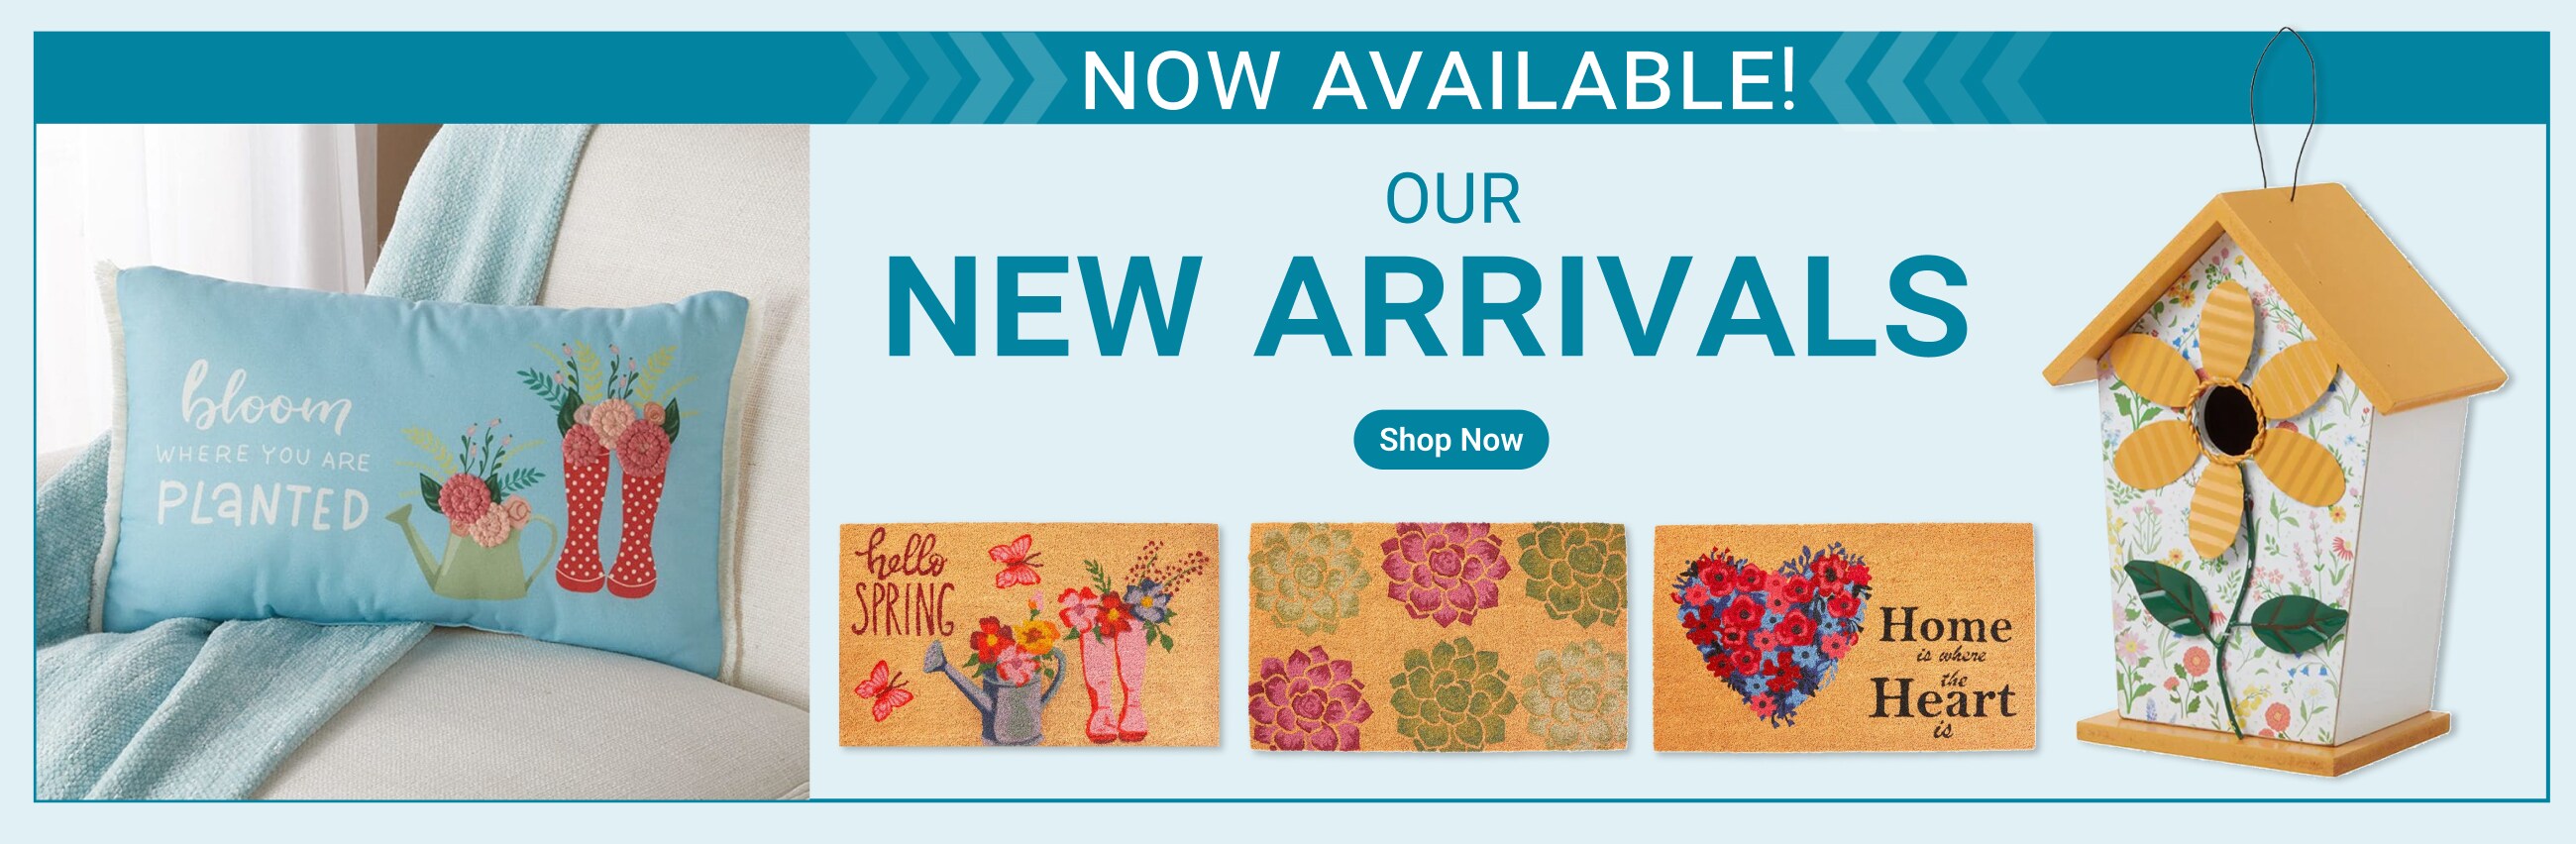 Now Available - Our New Arrivals - Shop Now!